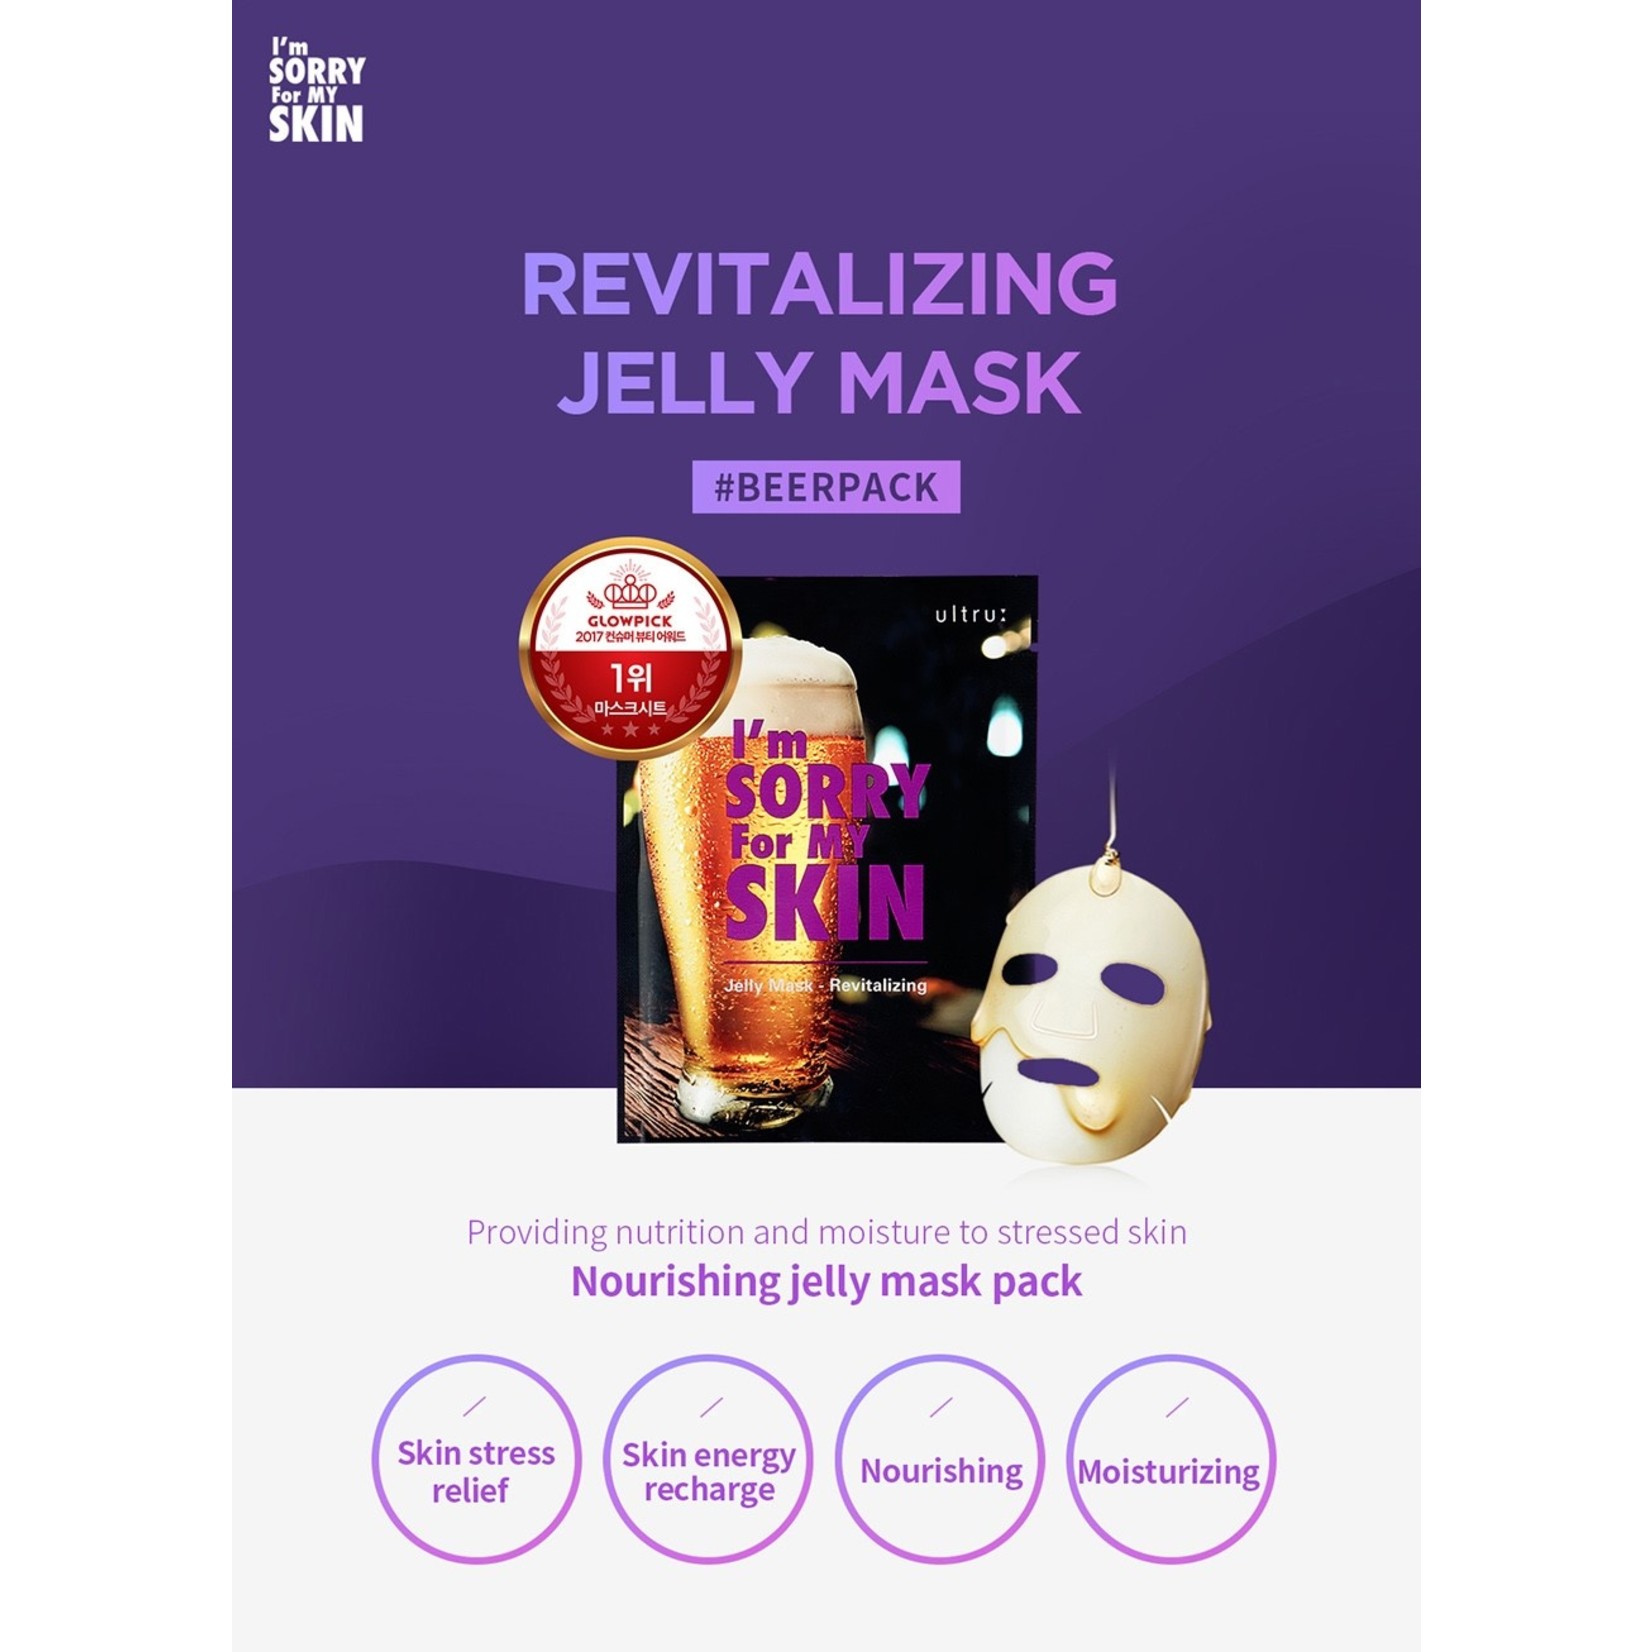 I'm SORRY For MY SKIN Jelly Mask [Revitalizing]